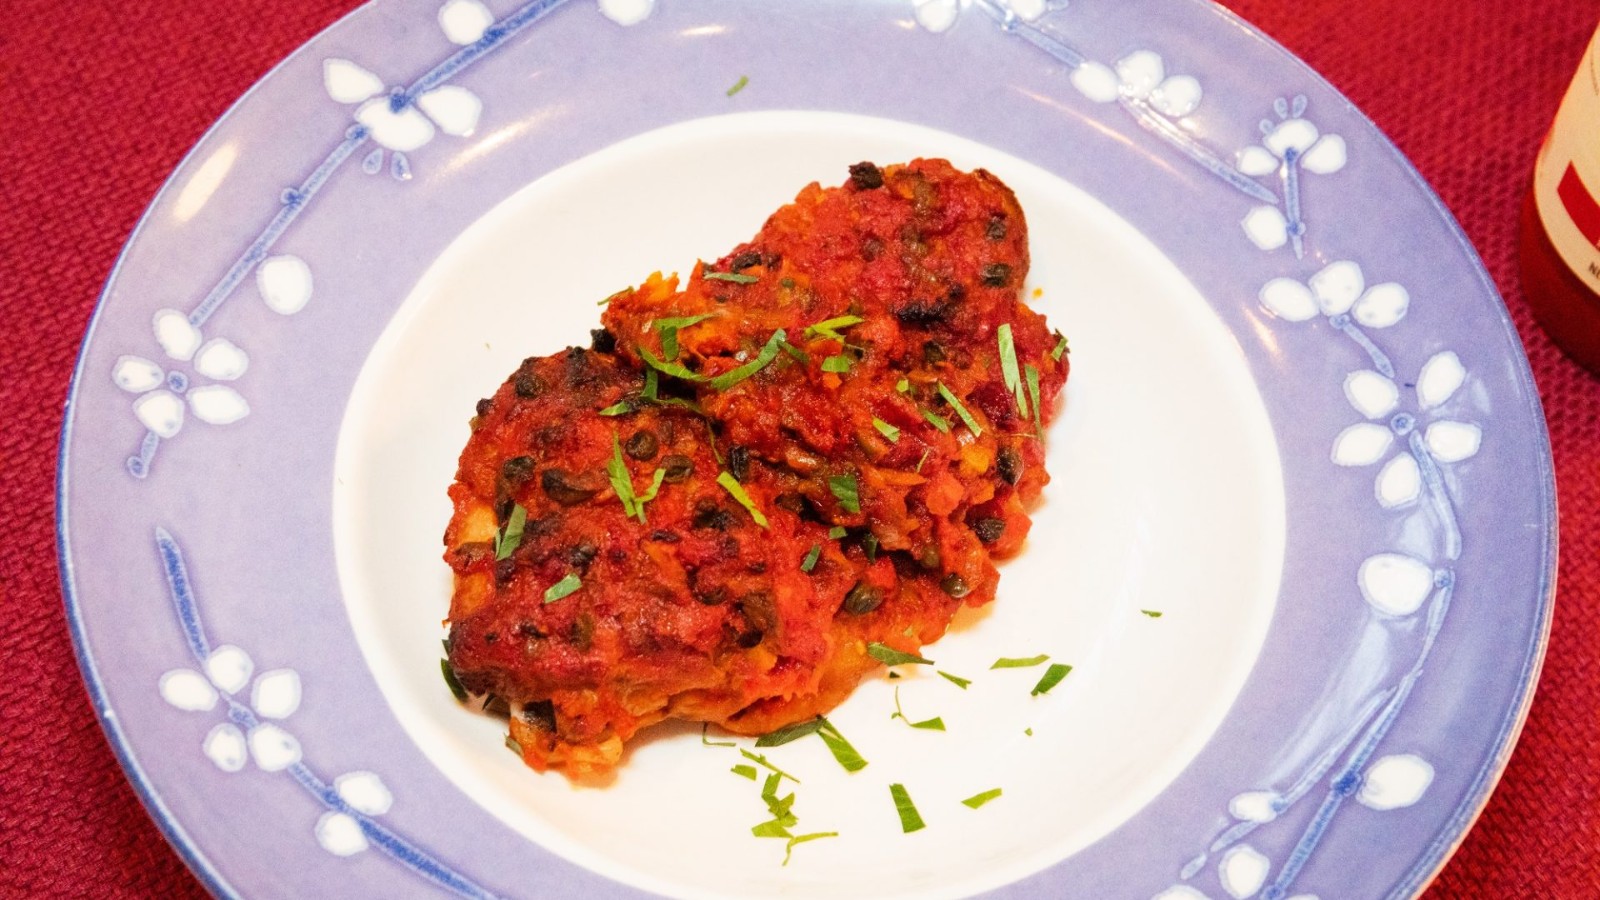 Image of Gail Simmons' Tomato Braised Chicken Thighs